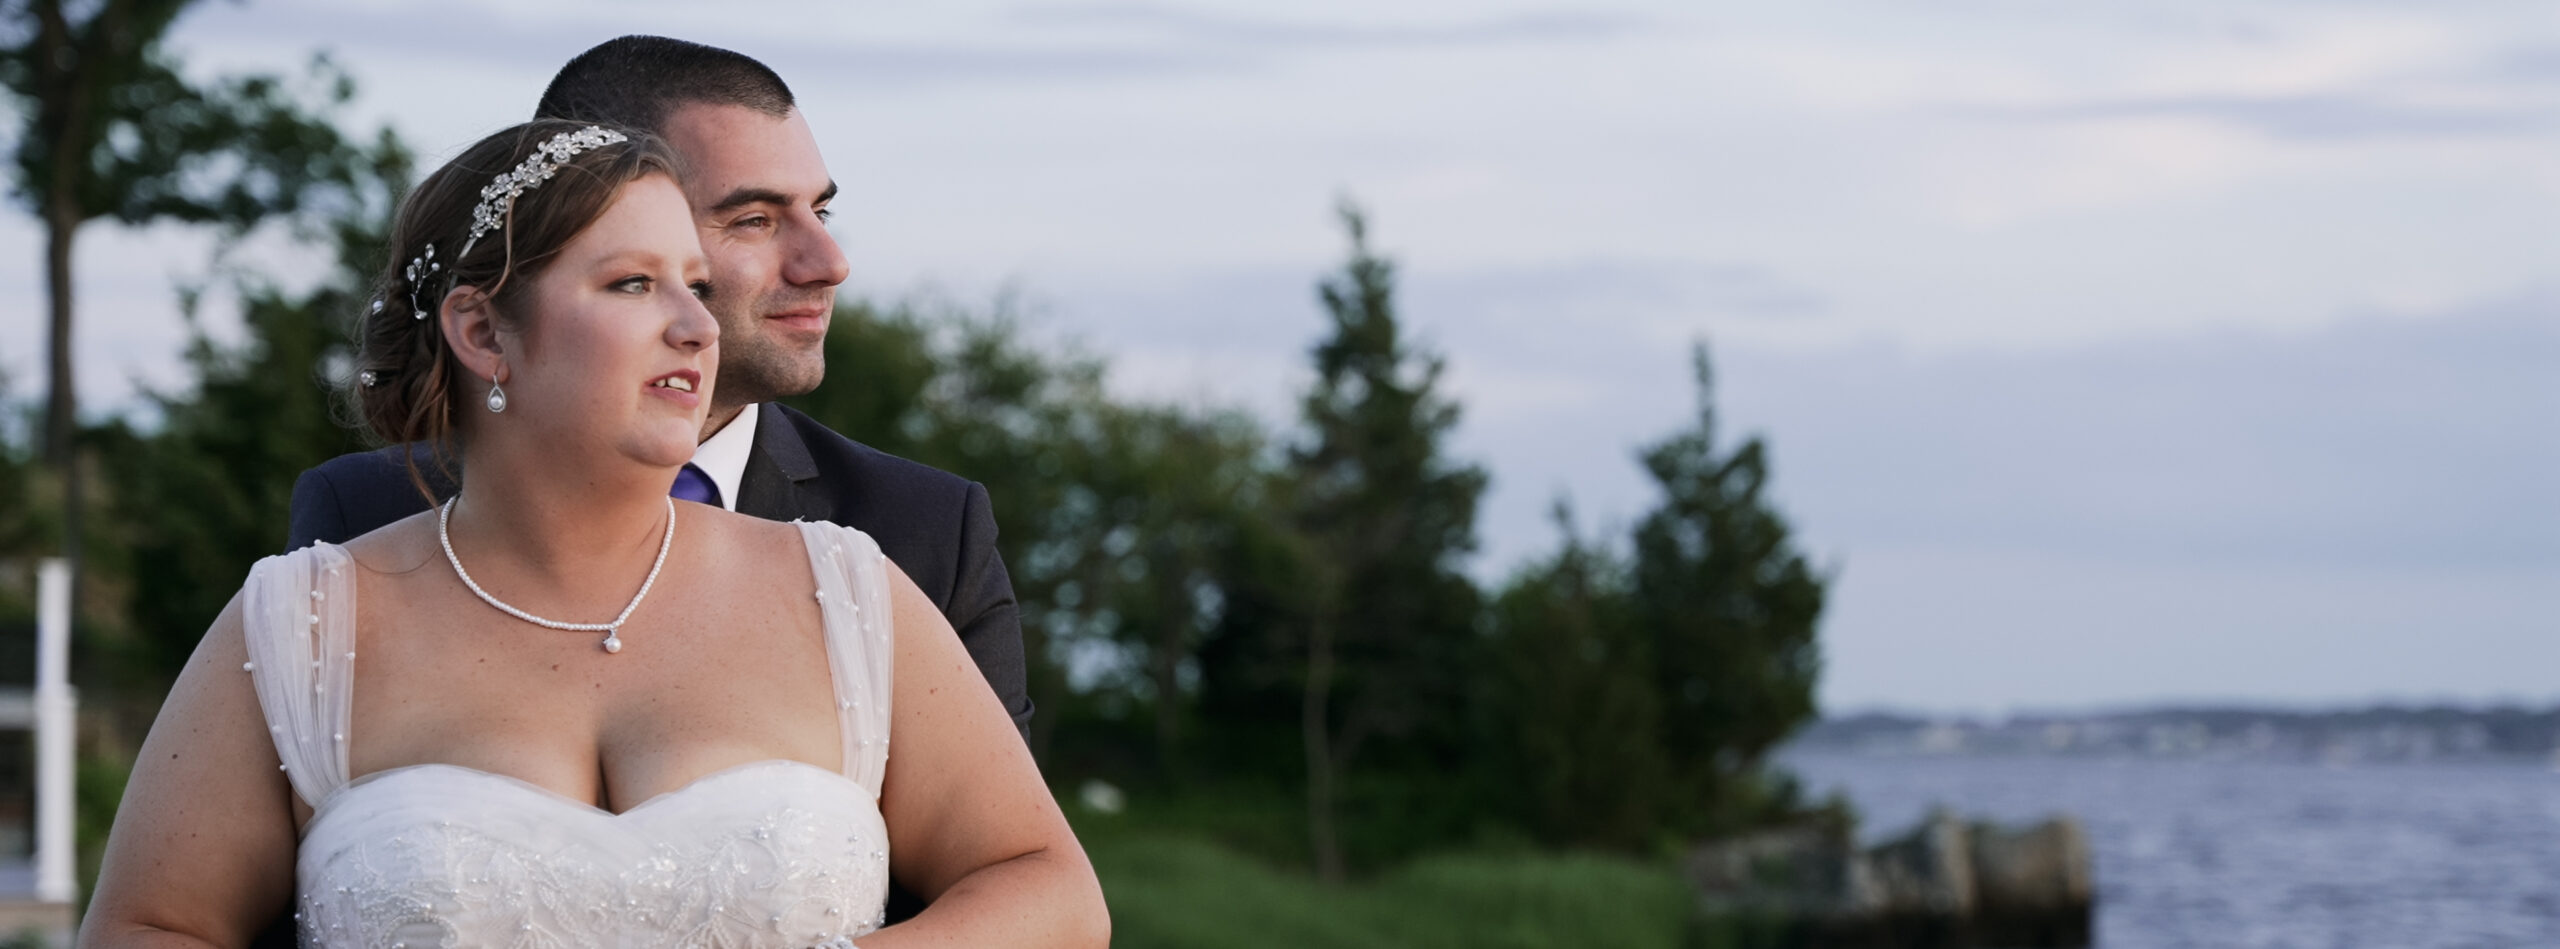 Couple looking of into the distance during their wedding. Groom is wearing a black suit and is standing behind the bride wrapping his arms around her. Bride is wearing a sweetheart dress with straps made out of tule covered in pearls. You can see trees and the bay behind them.